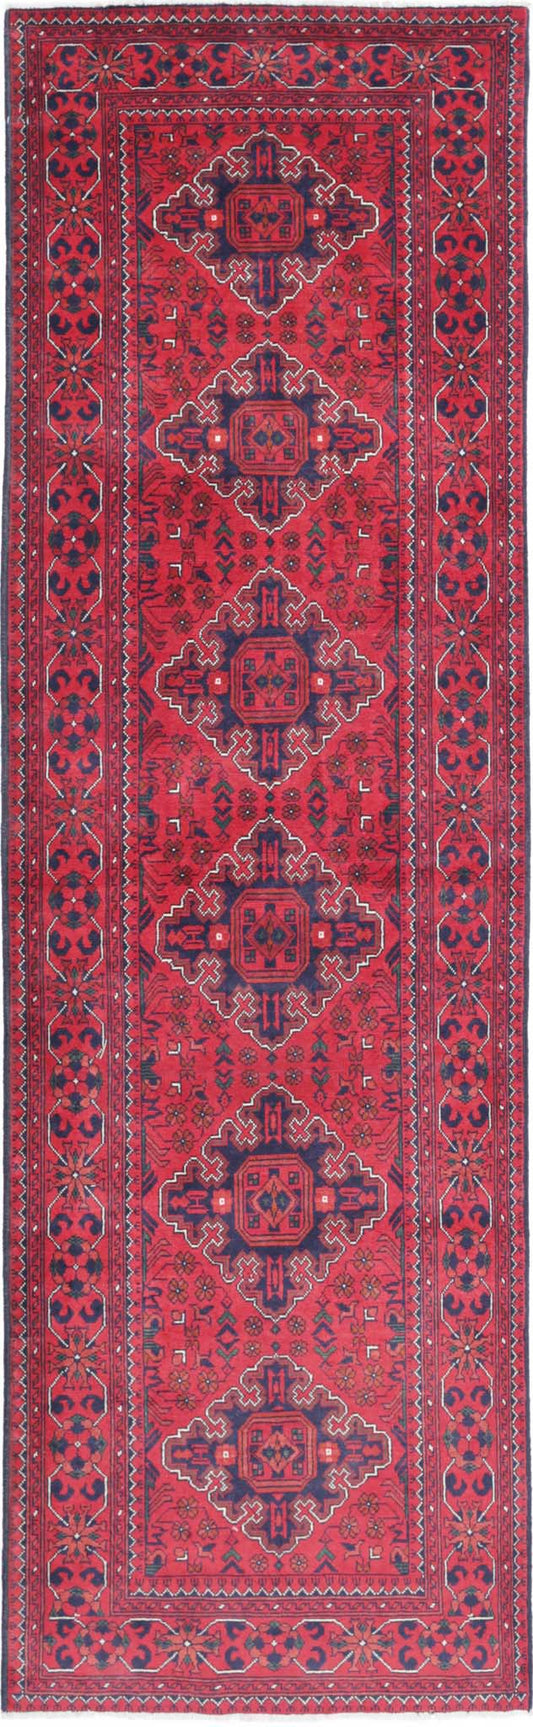 Tribal Hand Knotted Afghan Khamyab Wool Rug of Size 2'8'' X 9'7'' in Red and Black Colors - Made in Afghanistan